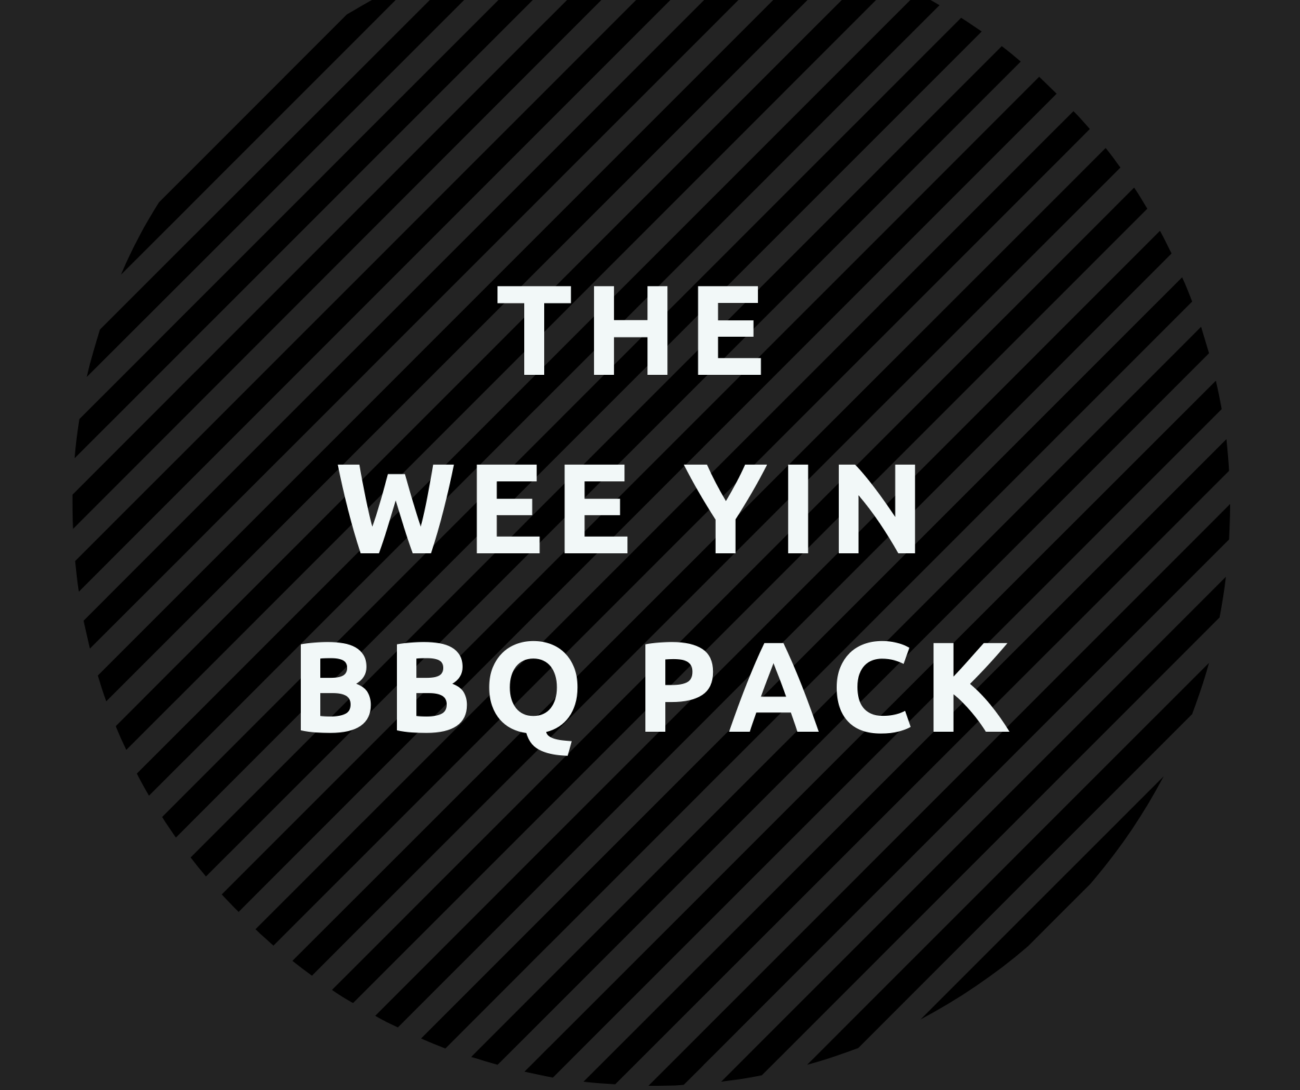 The wee yin bbq pack